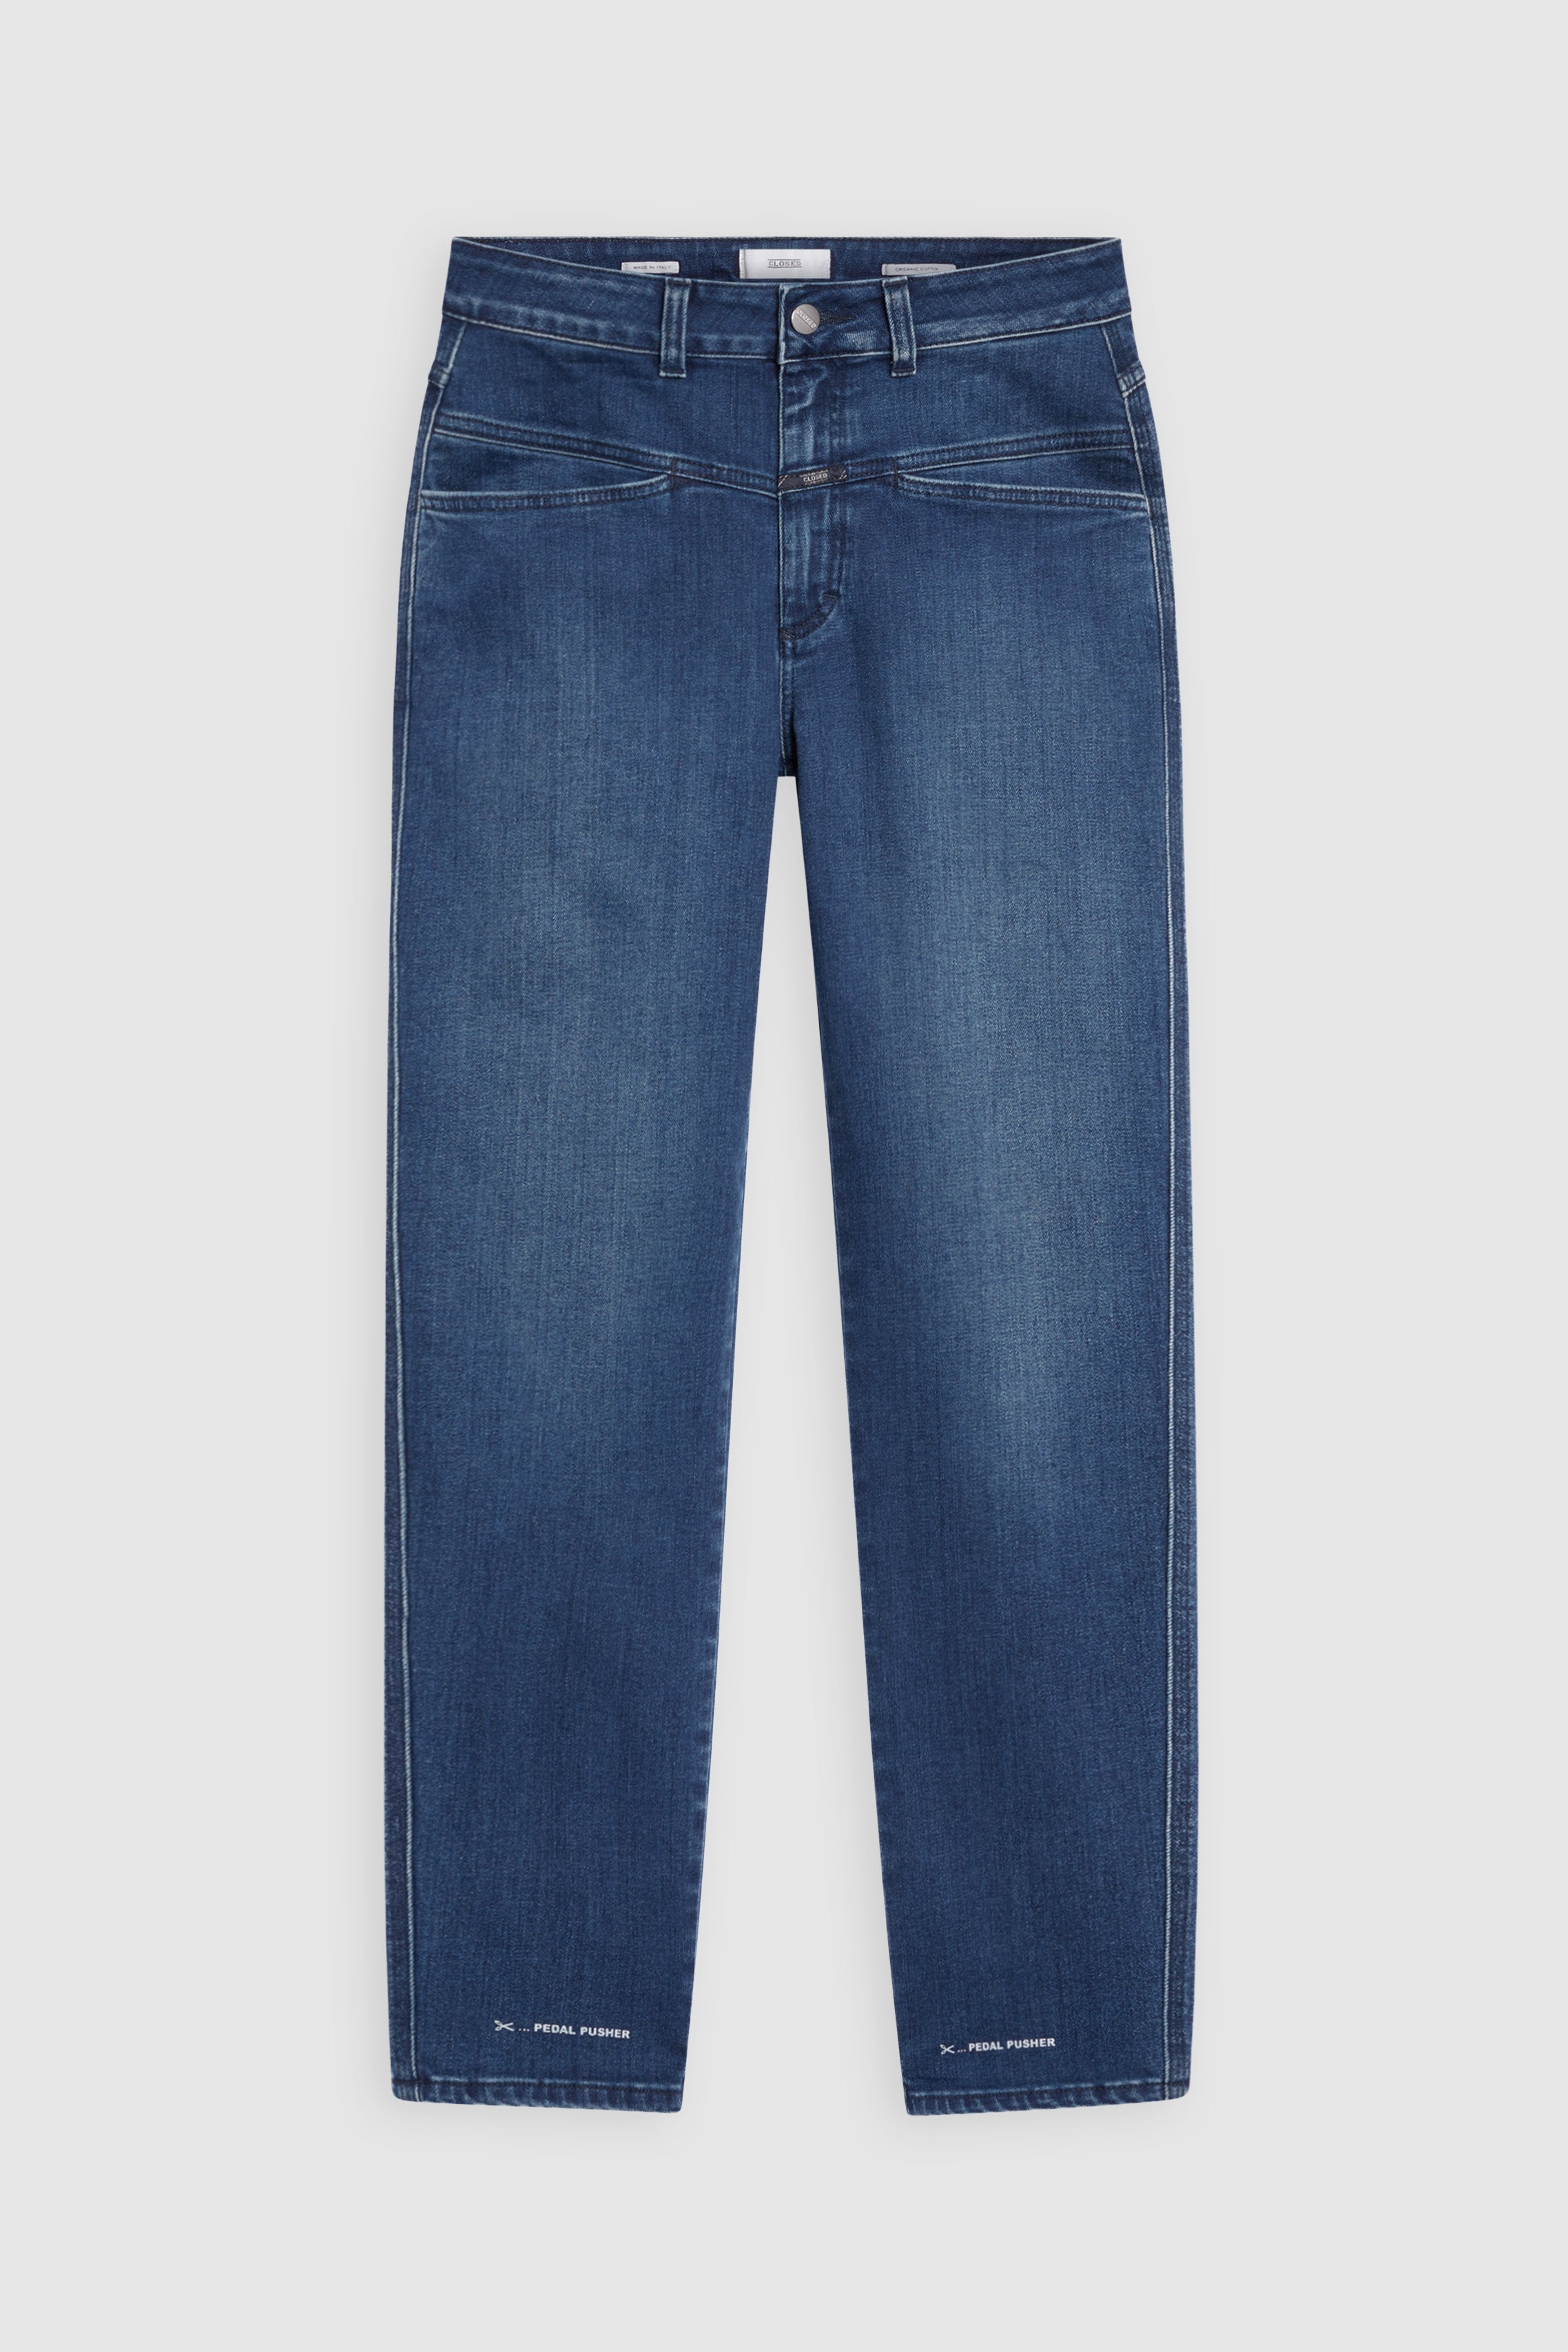 STYLE NAME PEDAL PUSHER JEANS